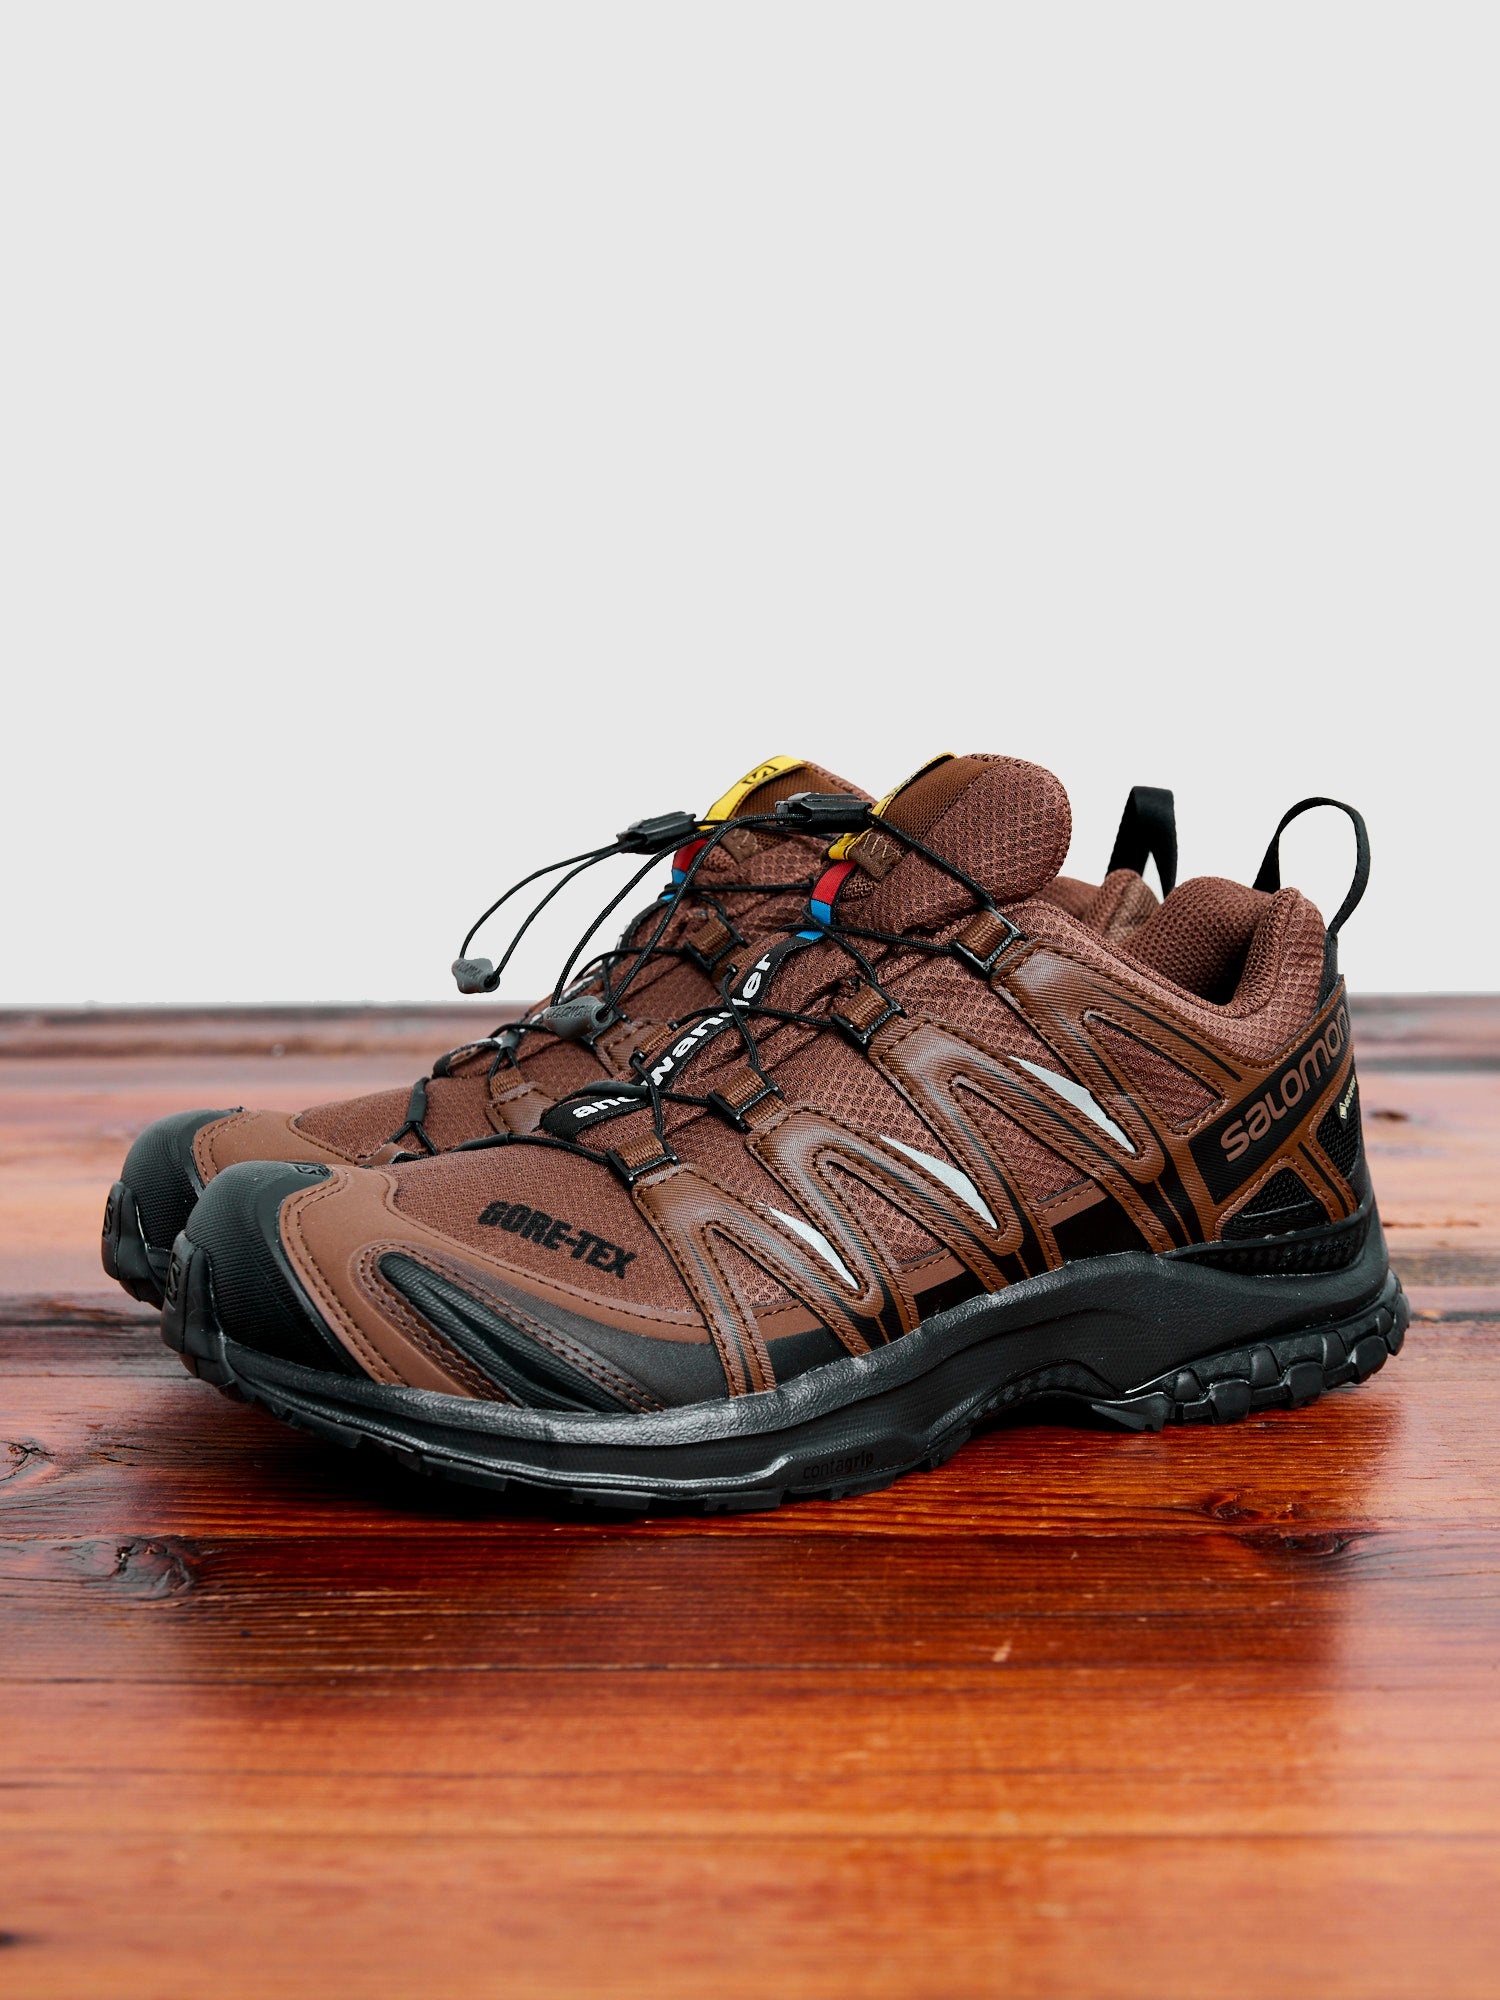 Salomon XA Pro 3D for and Wander in Brown - 1